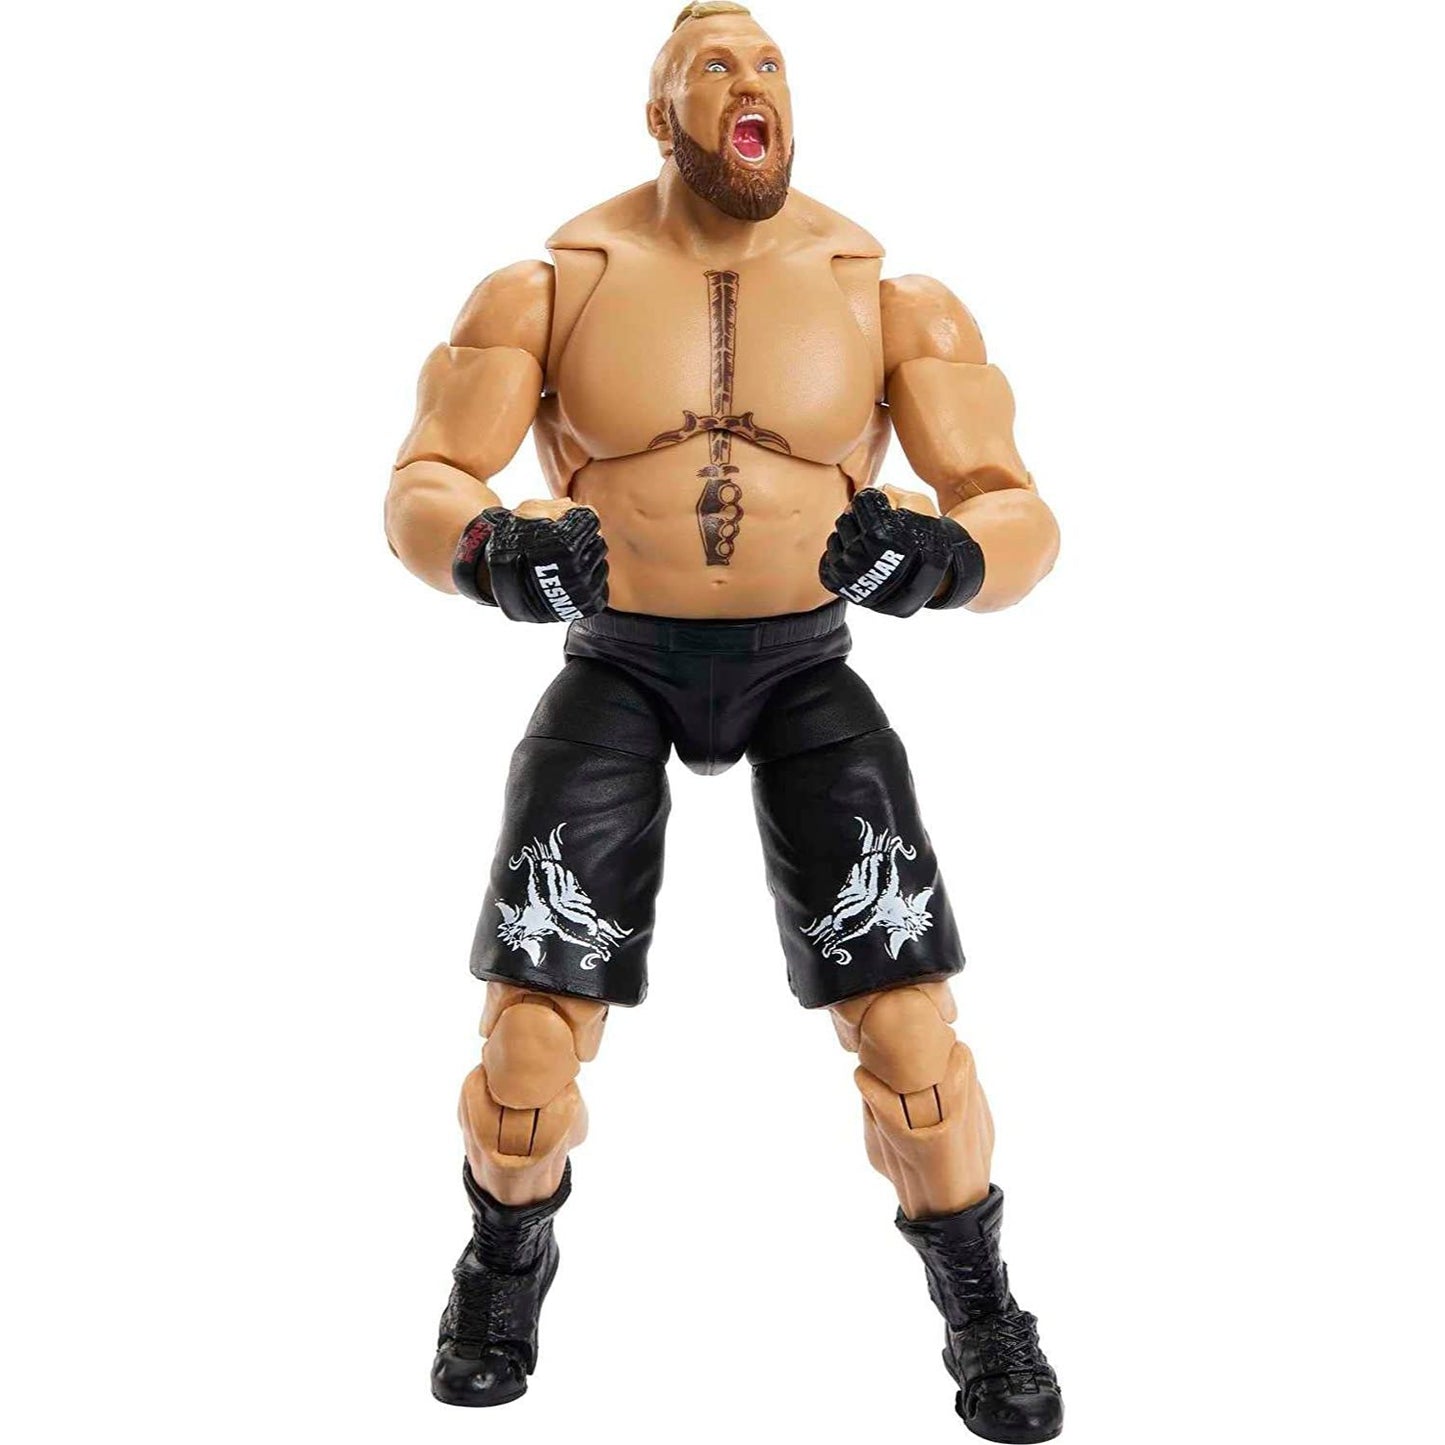 WWE Brock Lesnar Ultimate Edition Action Figure Toy